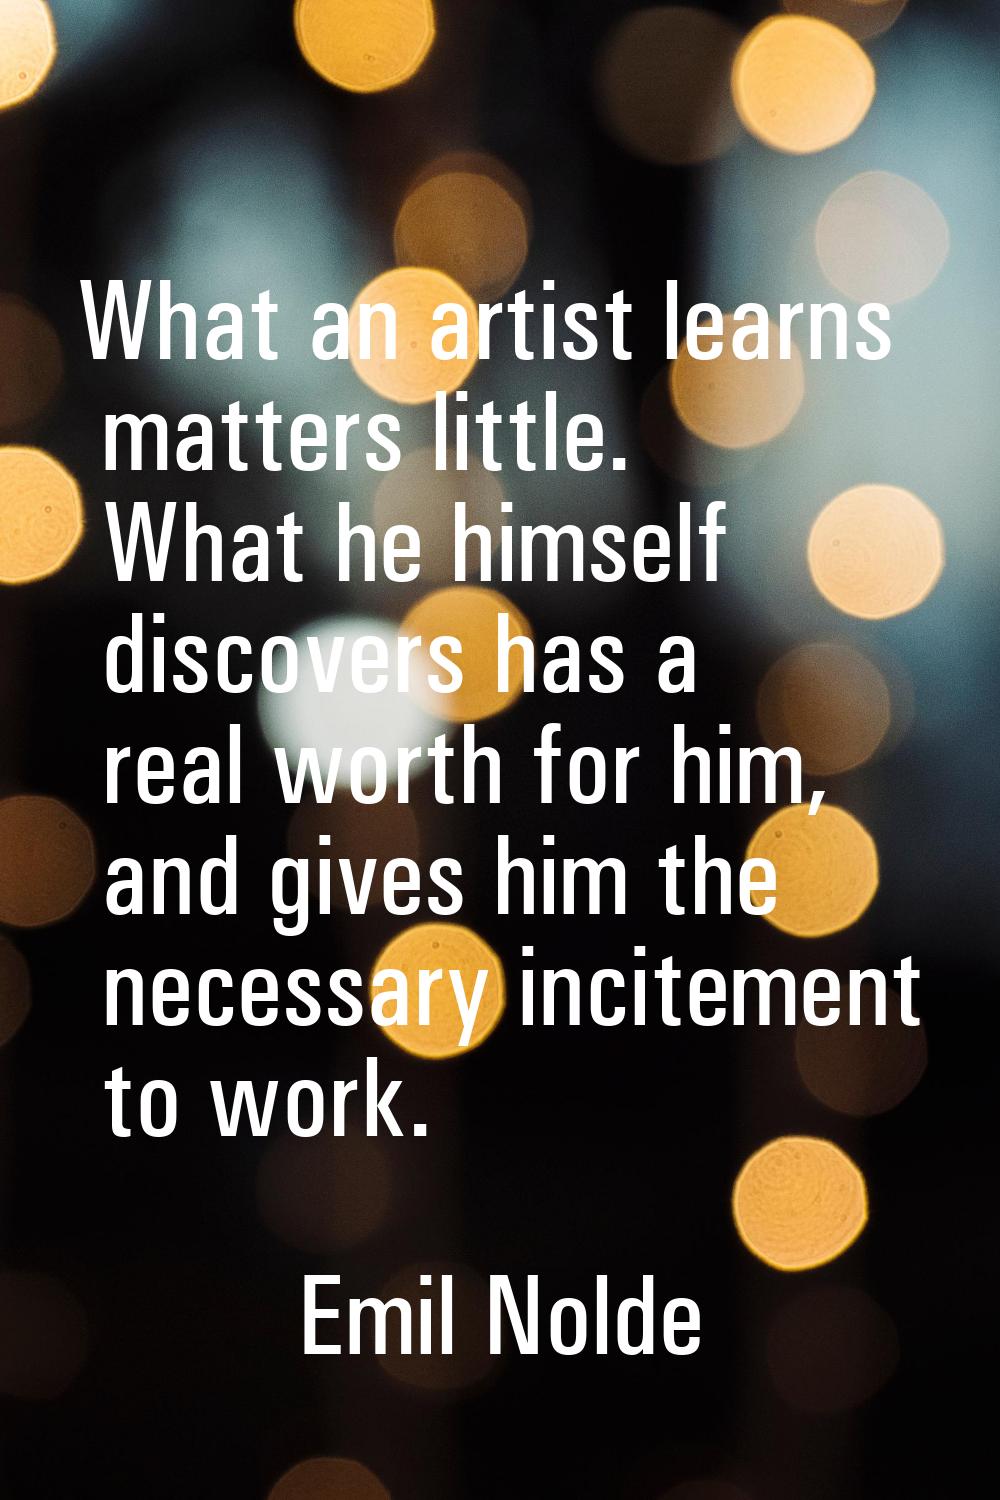 What an artist learns matters little. What he himself discovers has a real worth for him, and gives